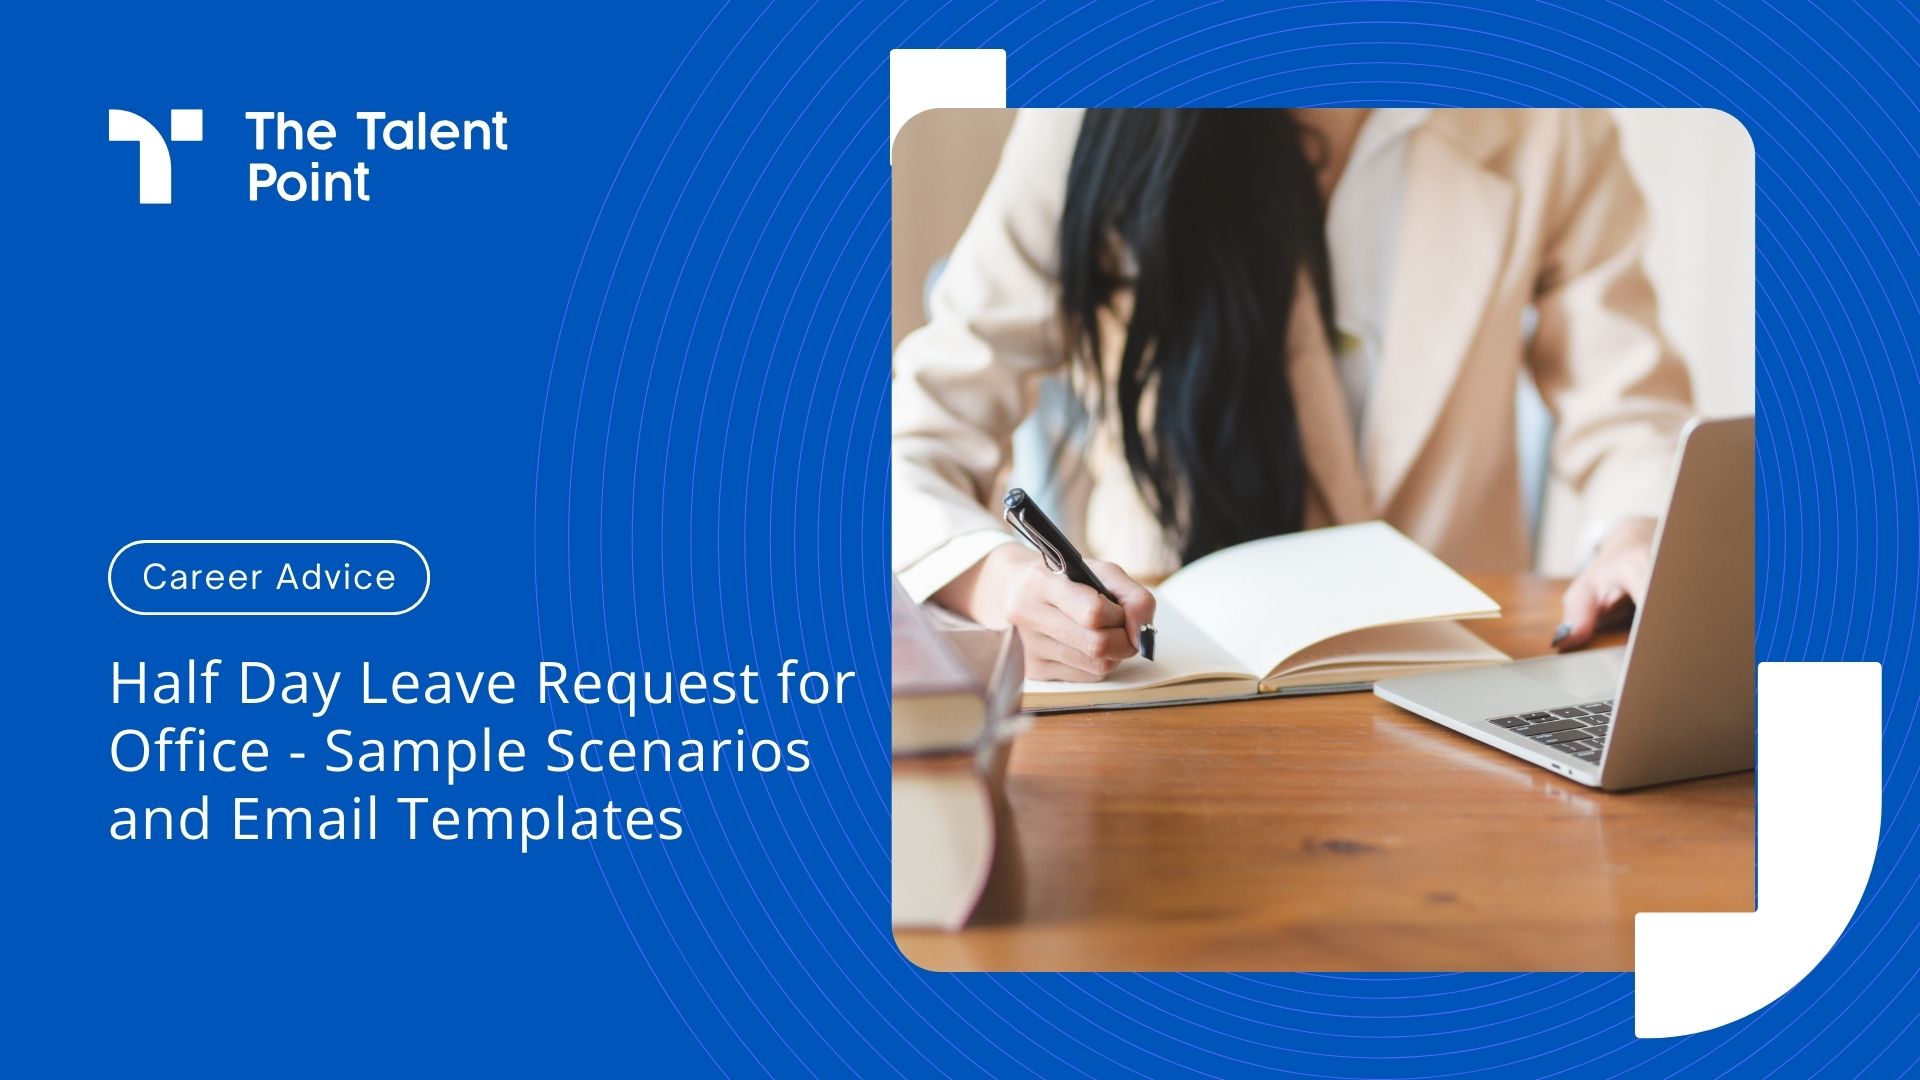 Half Day Leave Request for Office - Sample Scenarios and Email Templates - TalentPoint